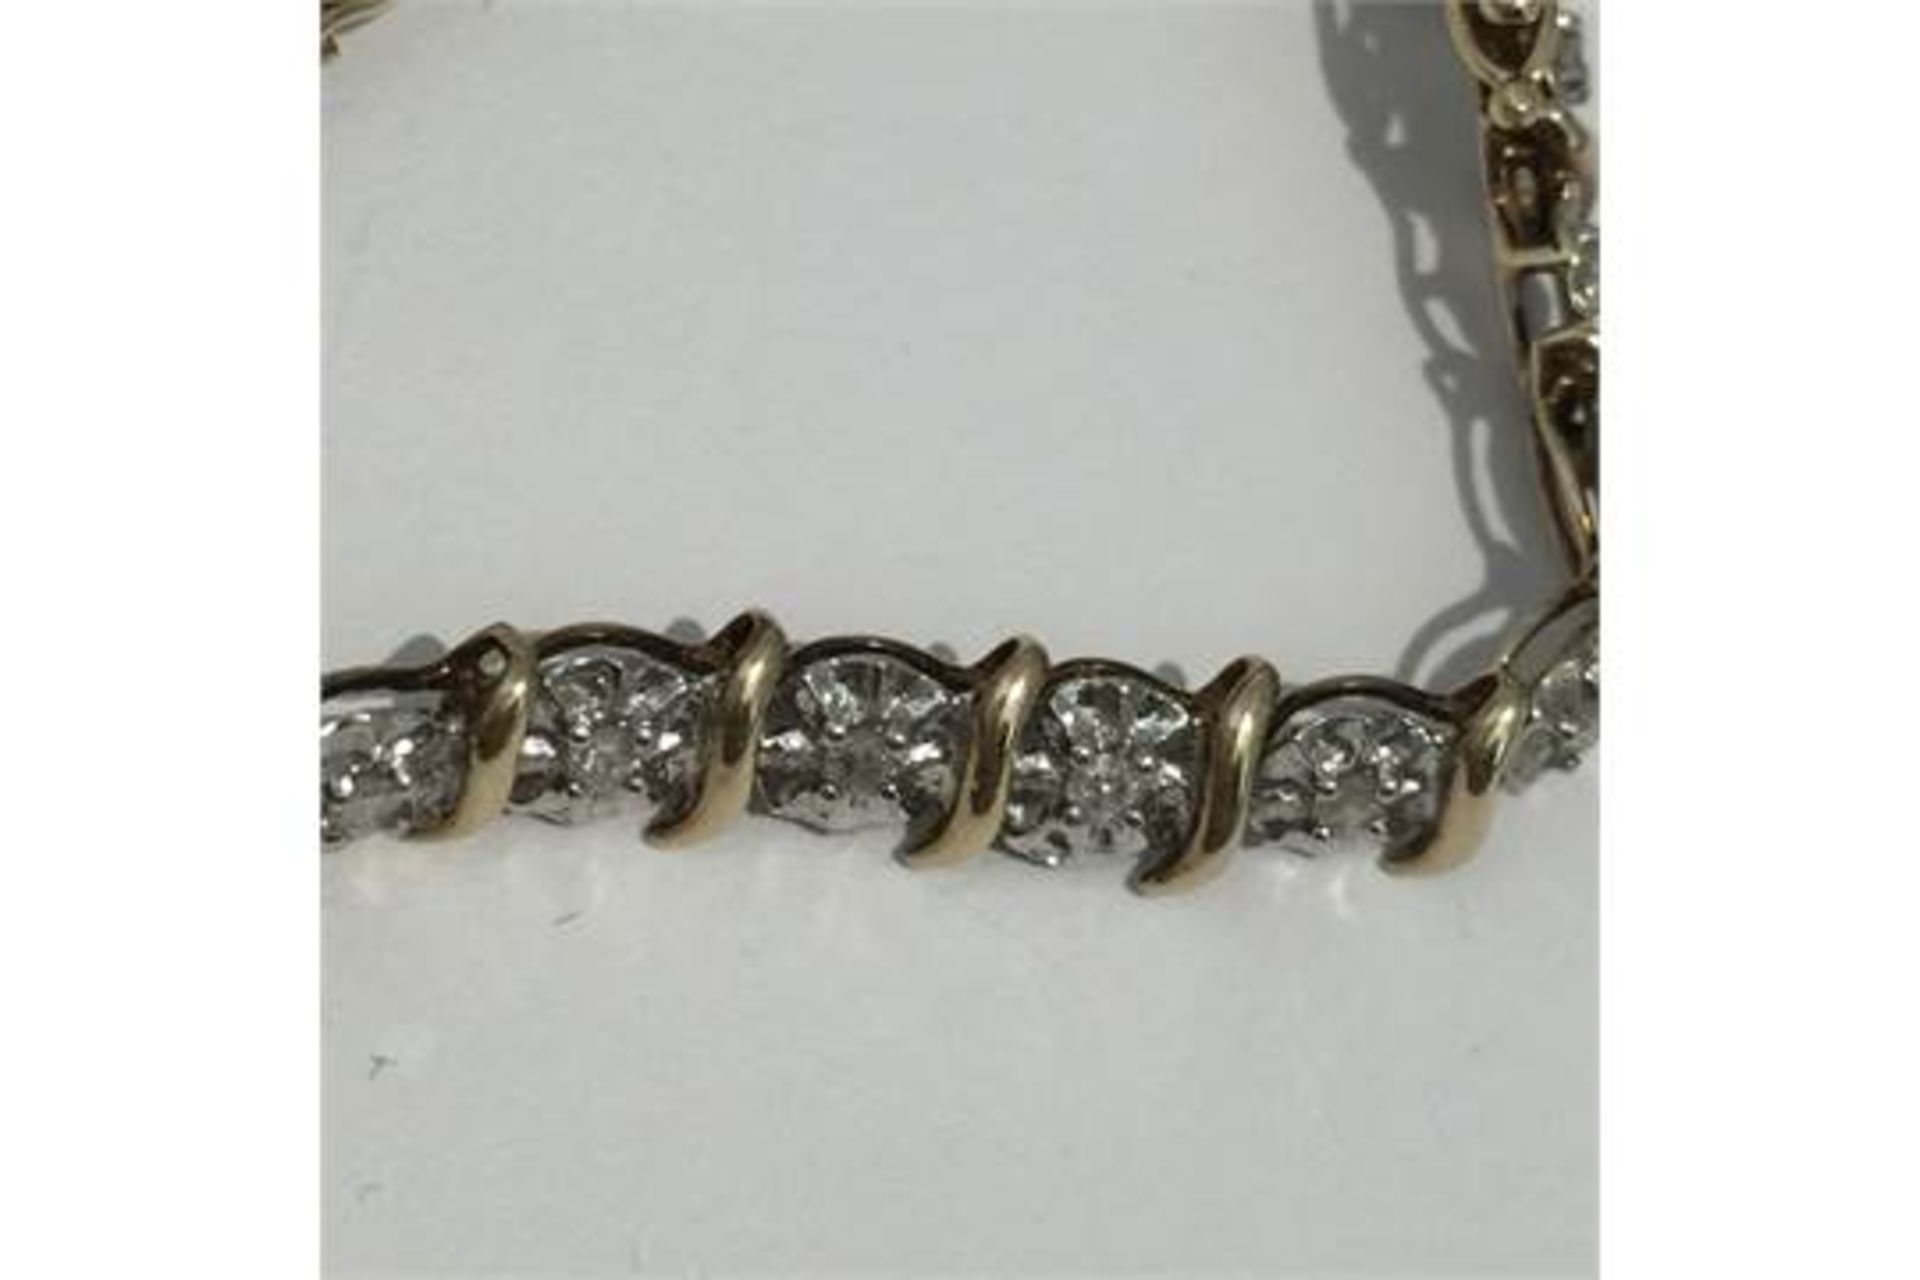 9ct Gold & Diamond Bracelet - Marked 375 - Tested as 9ct - Image 2 of 2